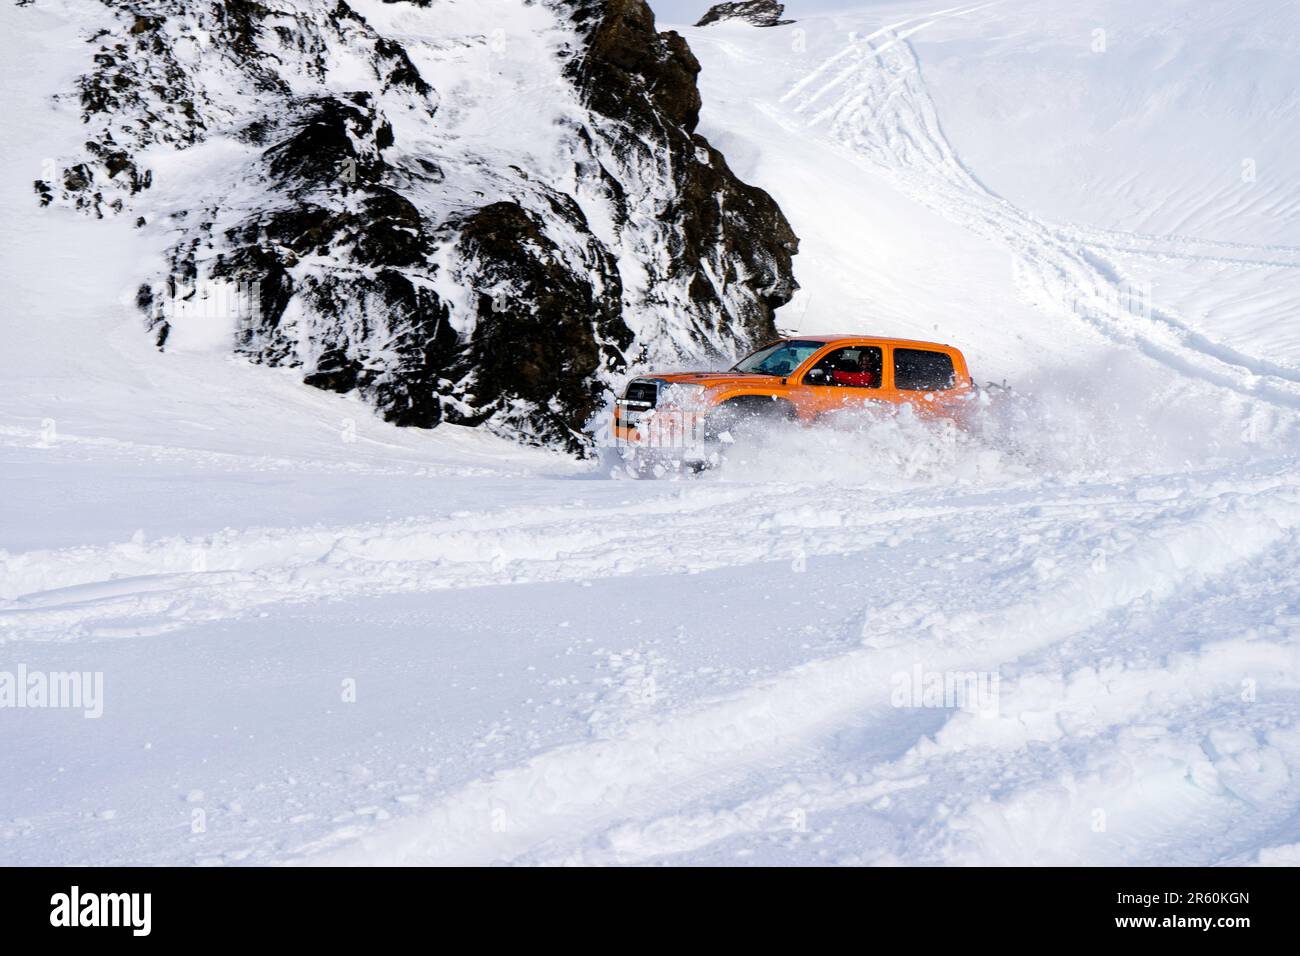 Arctic Trucks in the mountains of Iceland in the winter Stock Photo